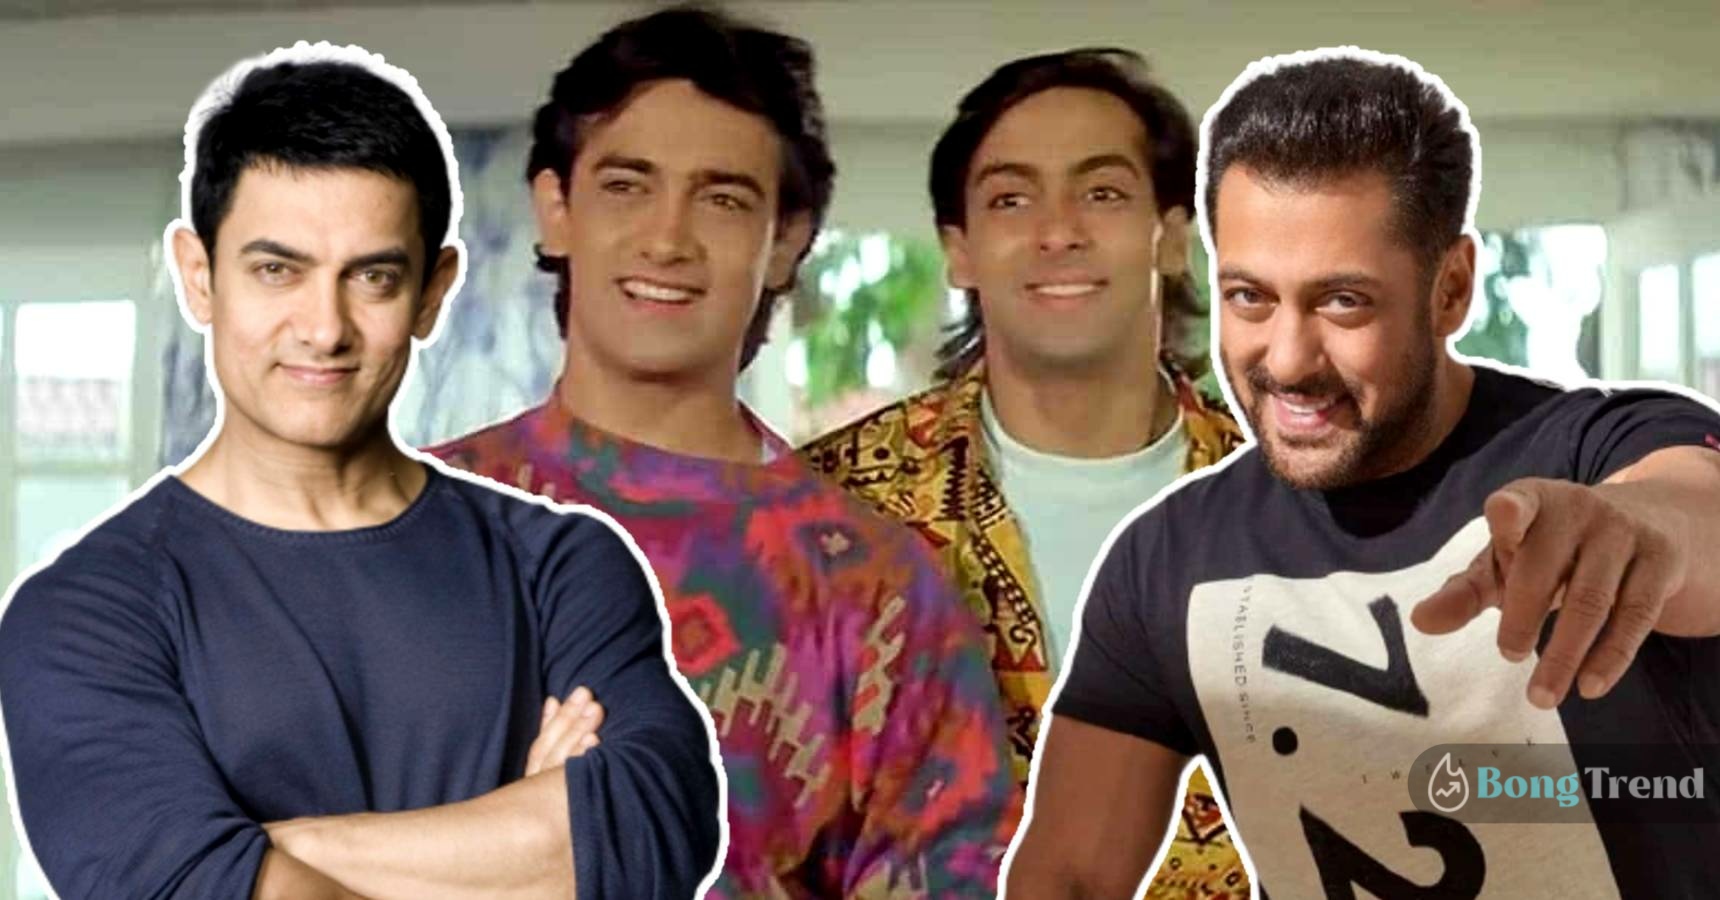 Bollywood superstar Salman Khan will reportedly be seen in a movie produced by Aamir Khan